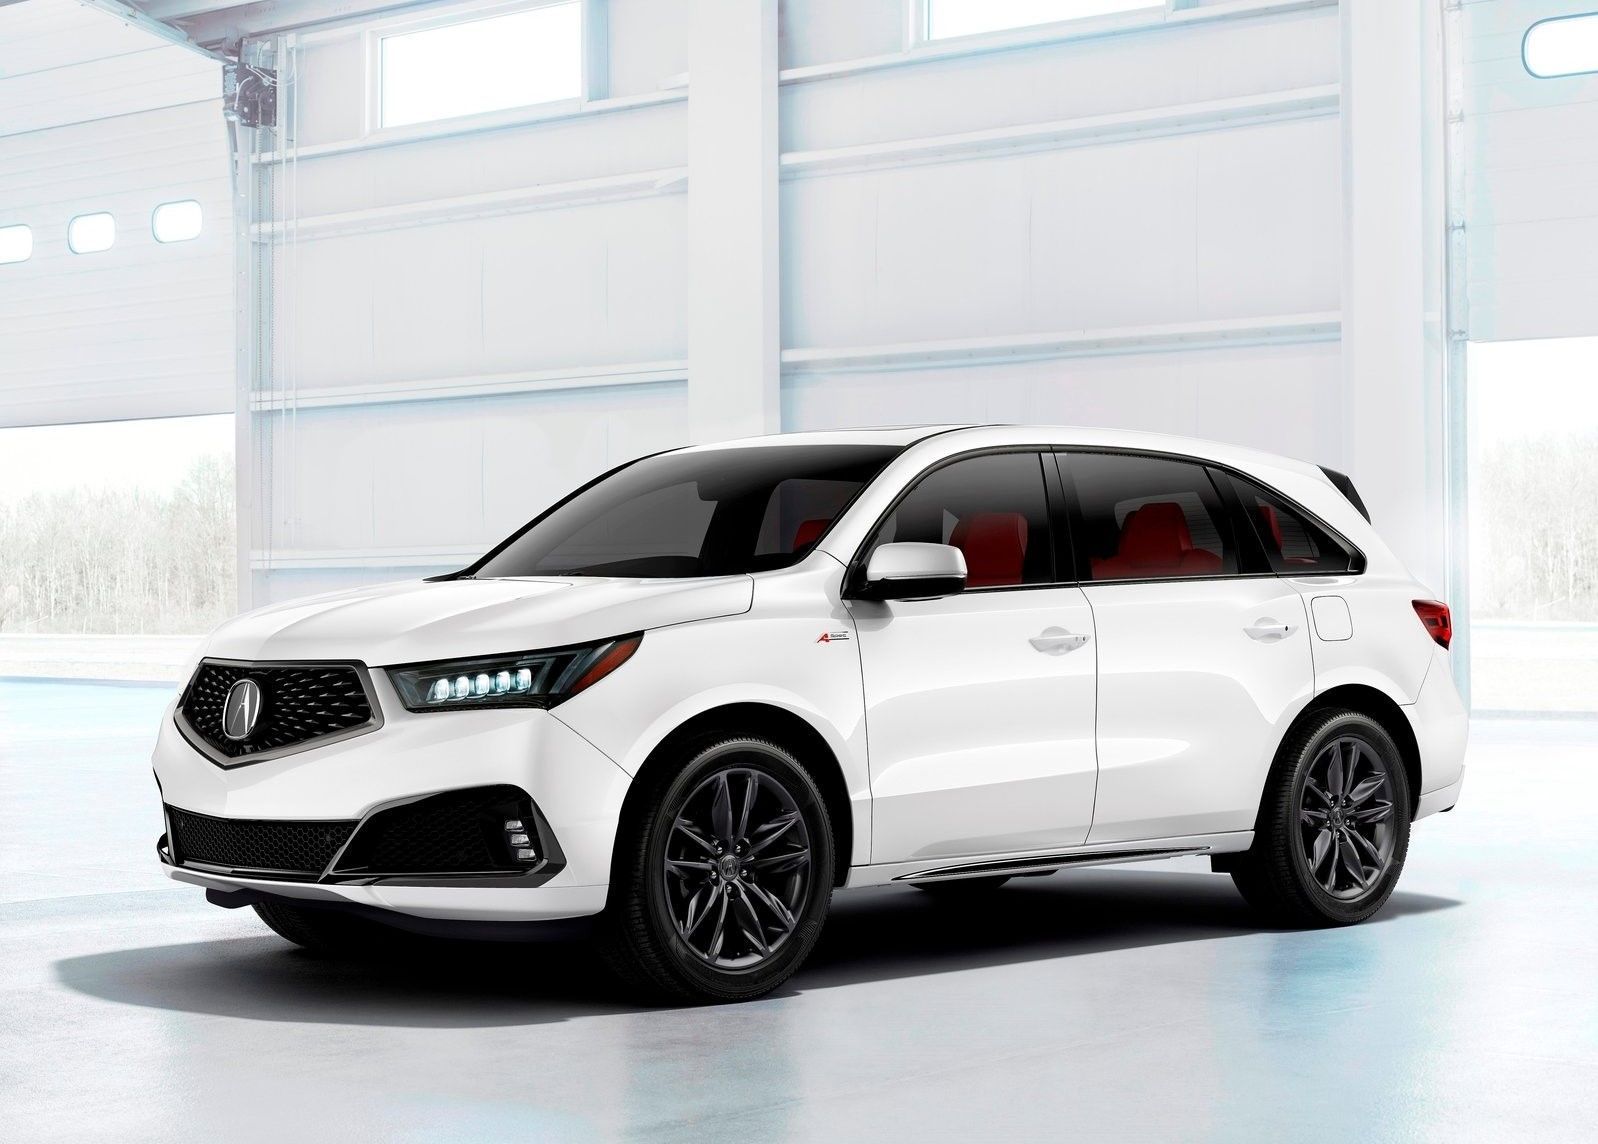 Acura MDX is troubled